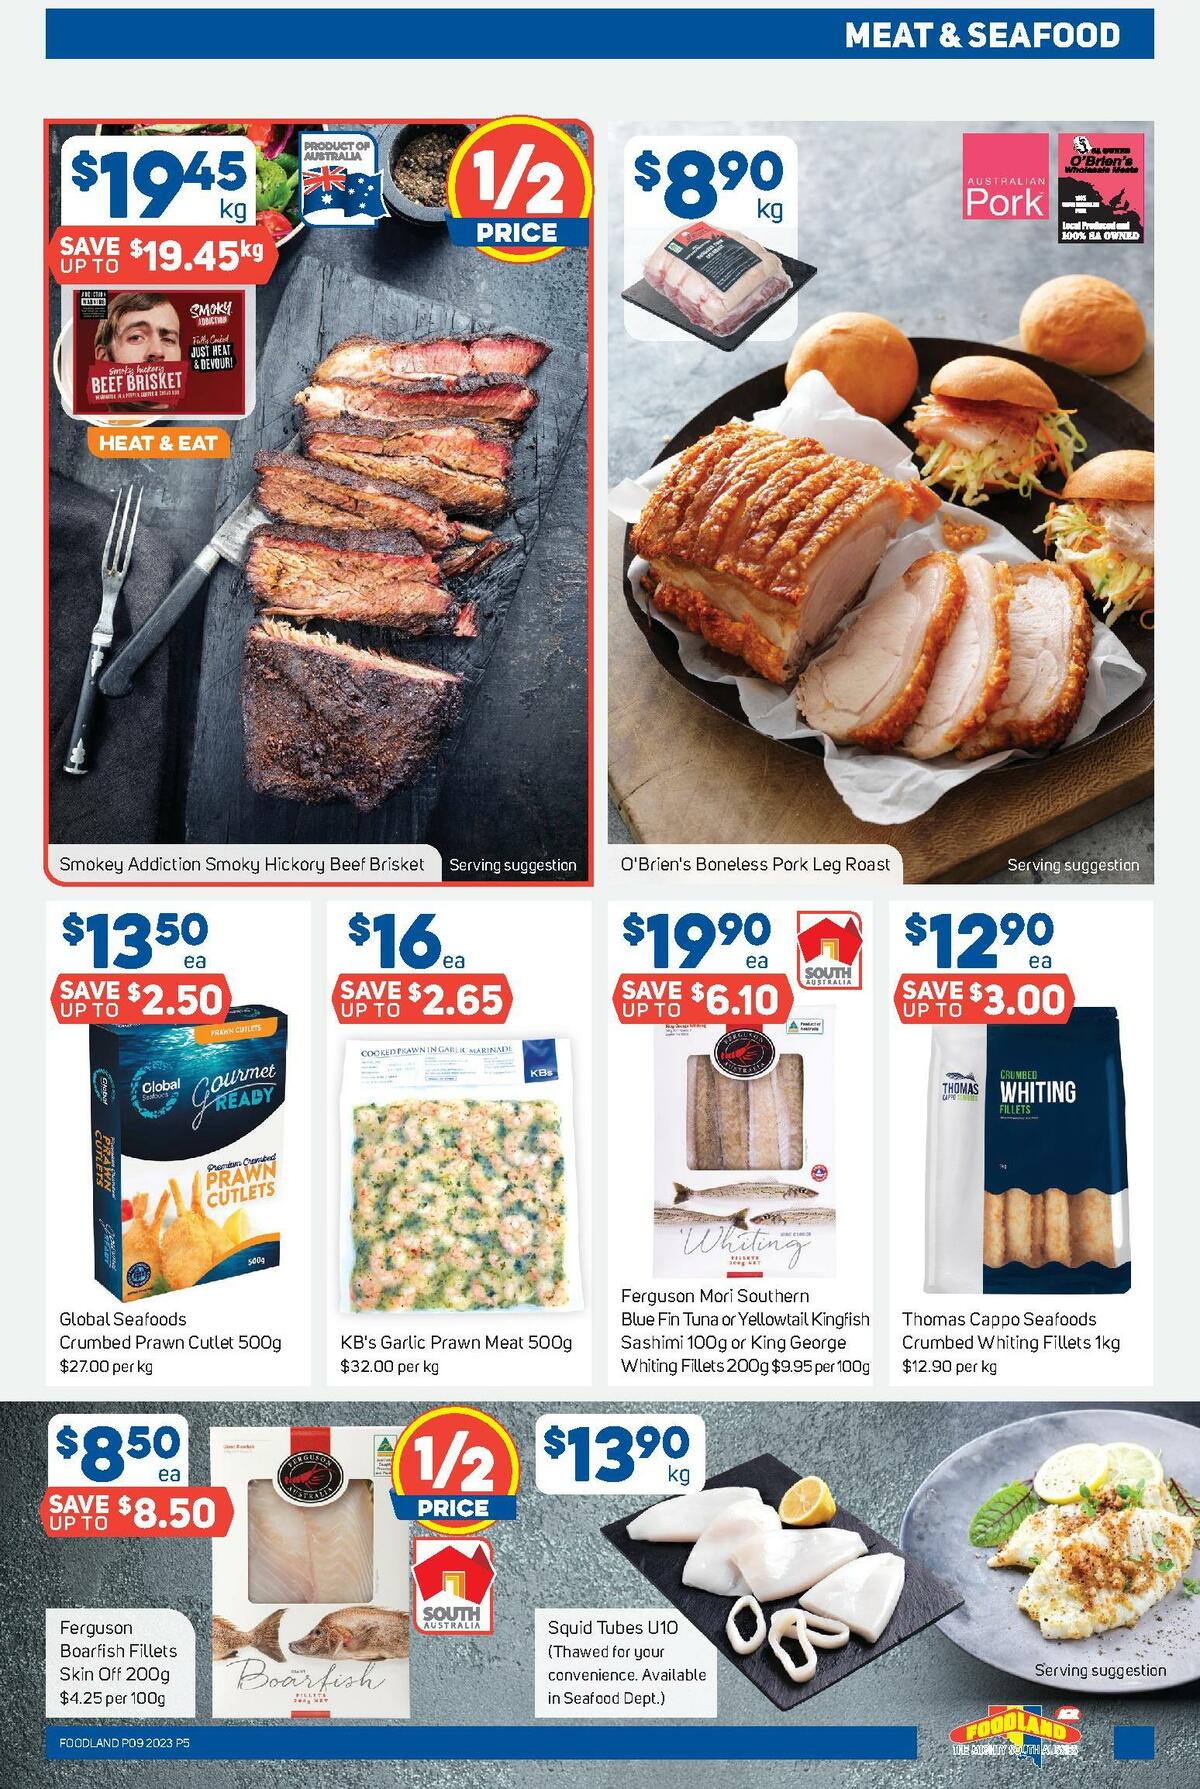 Foodland Catalogues from 1 March